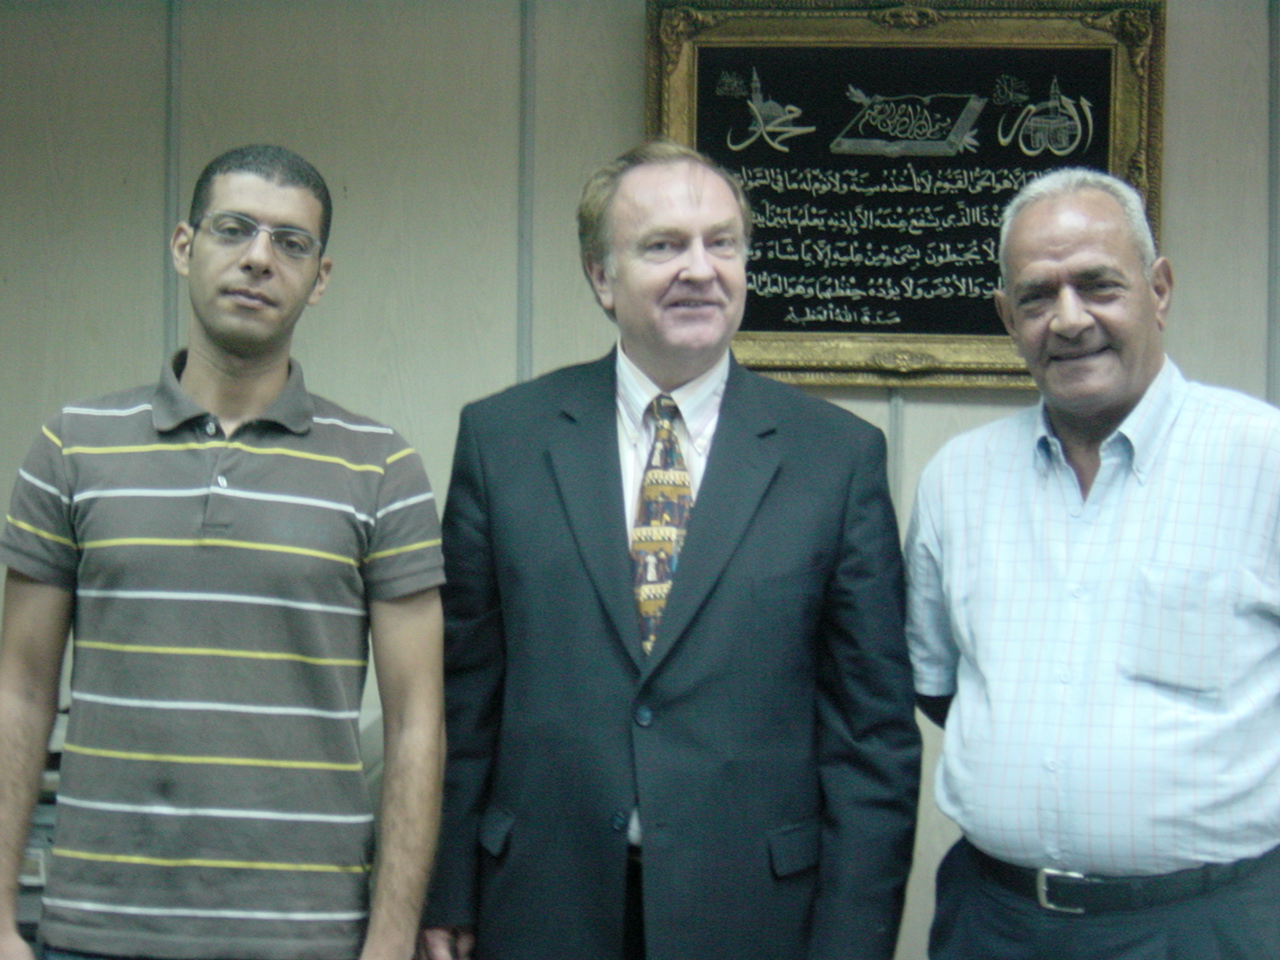 With EMPC Studios Heads of Production, Cairo Egypt